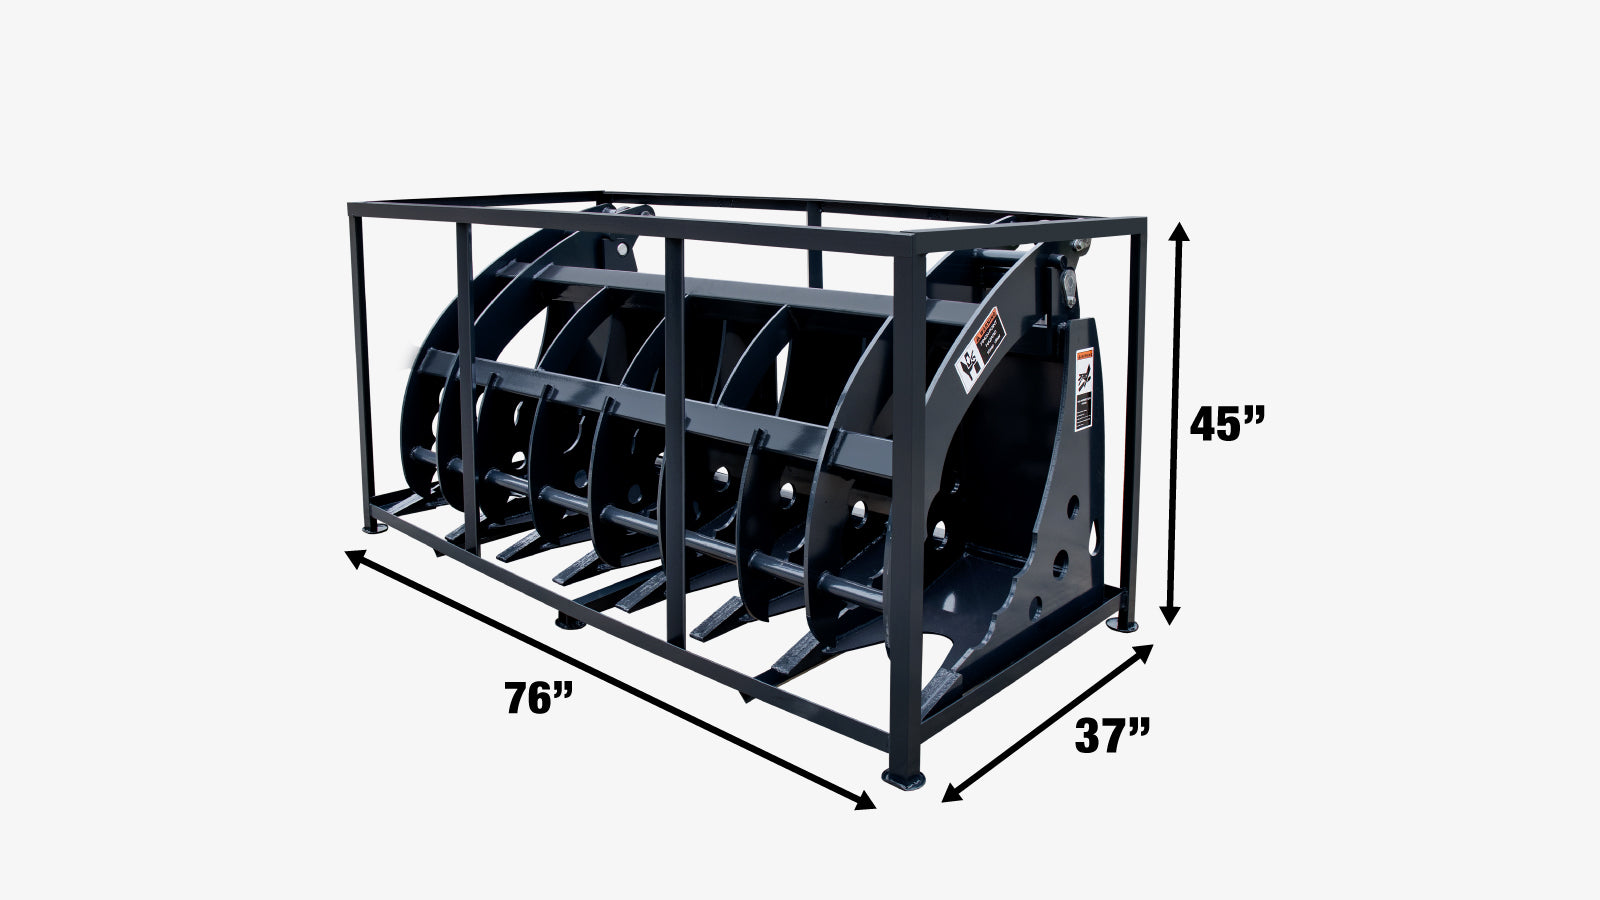 TMG Industrial 72” Skid Steer Root Rake Clamshell Grapple, Universal Mount, 54” Jaw Opening, 3000 lb Weight Capacity, TMG-SRR75-shipping-info-image